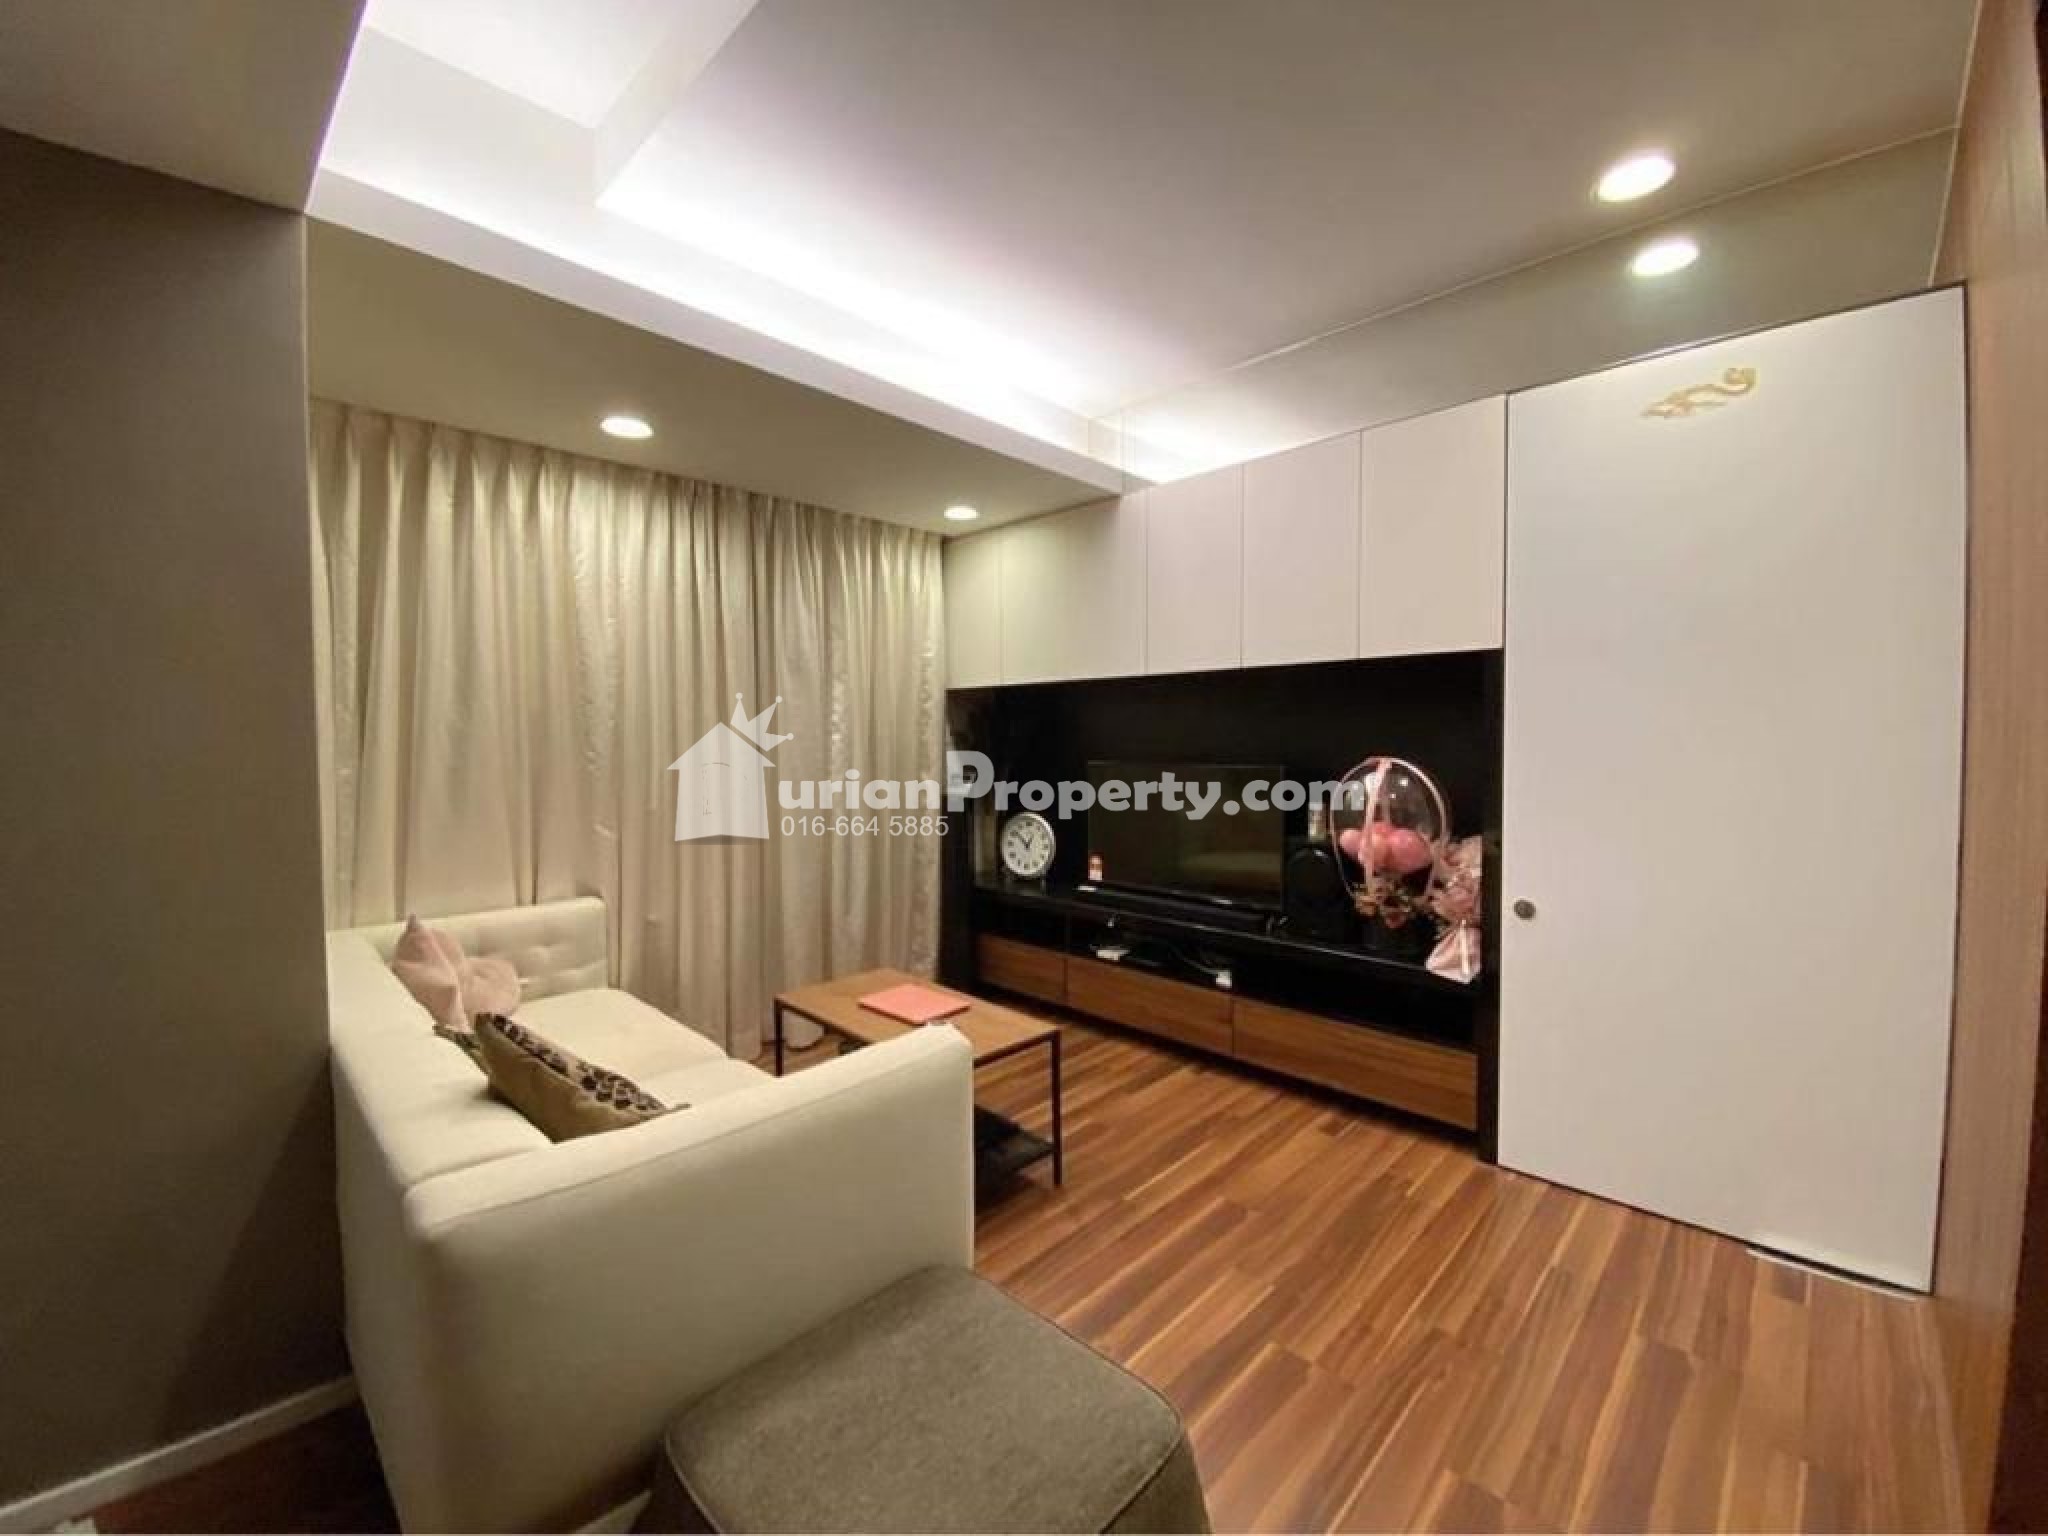 Condo For Sale at Verve Suites